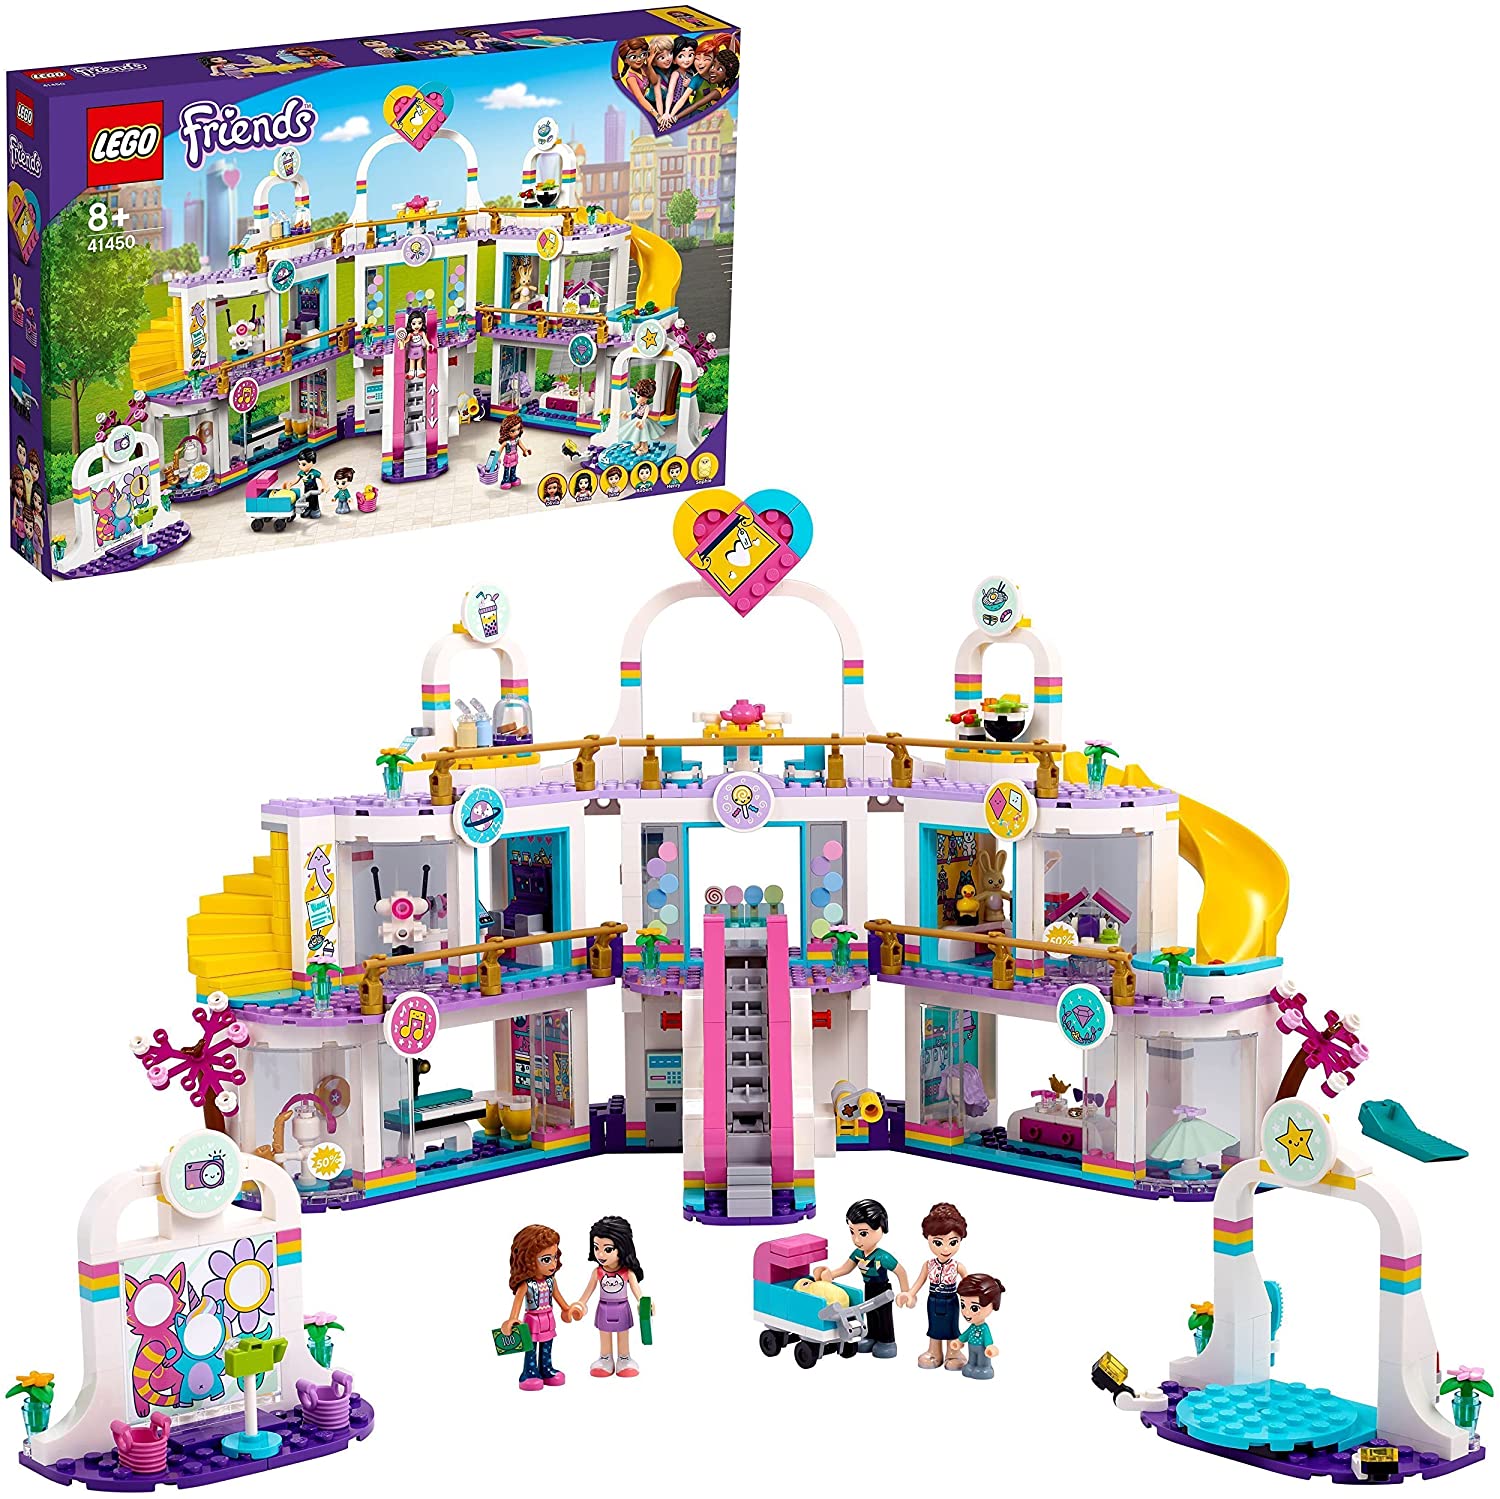 LEGO 41450 Friends Heartlake City Shopping Mall Building Set with 5 Stores 